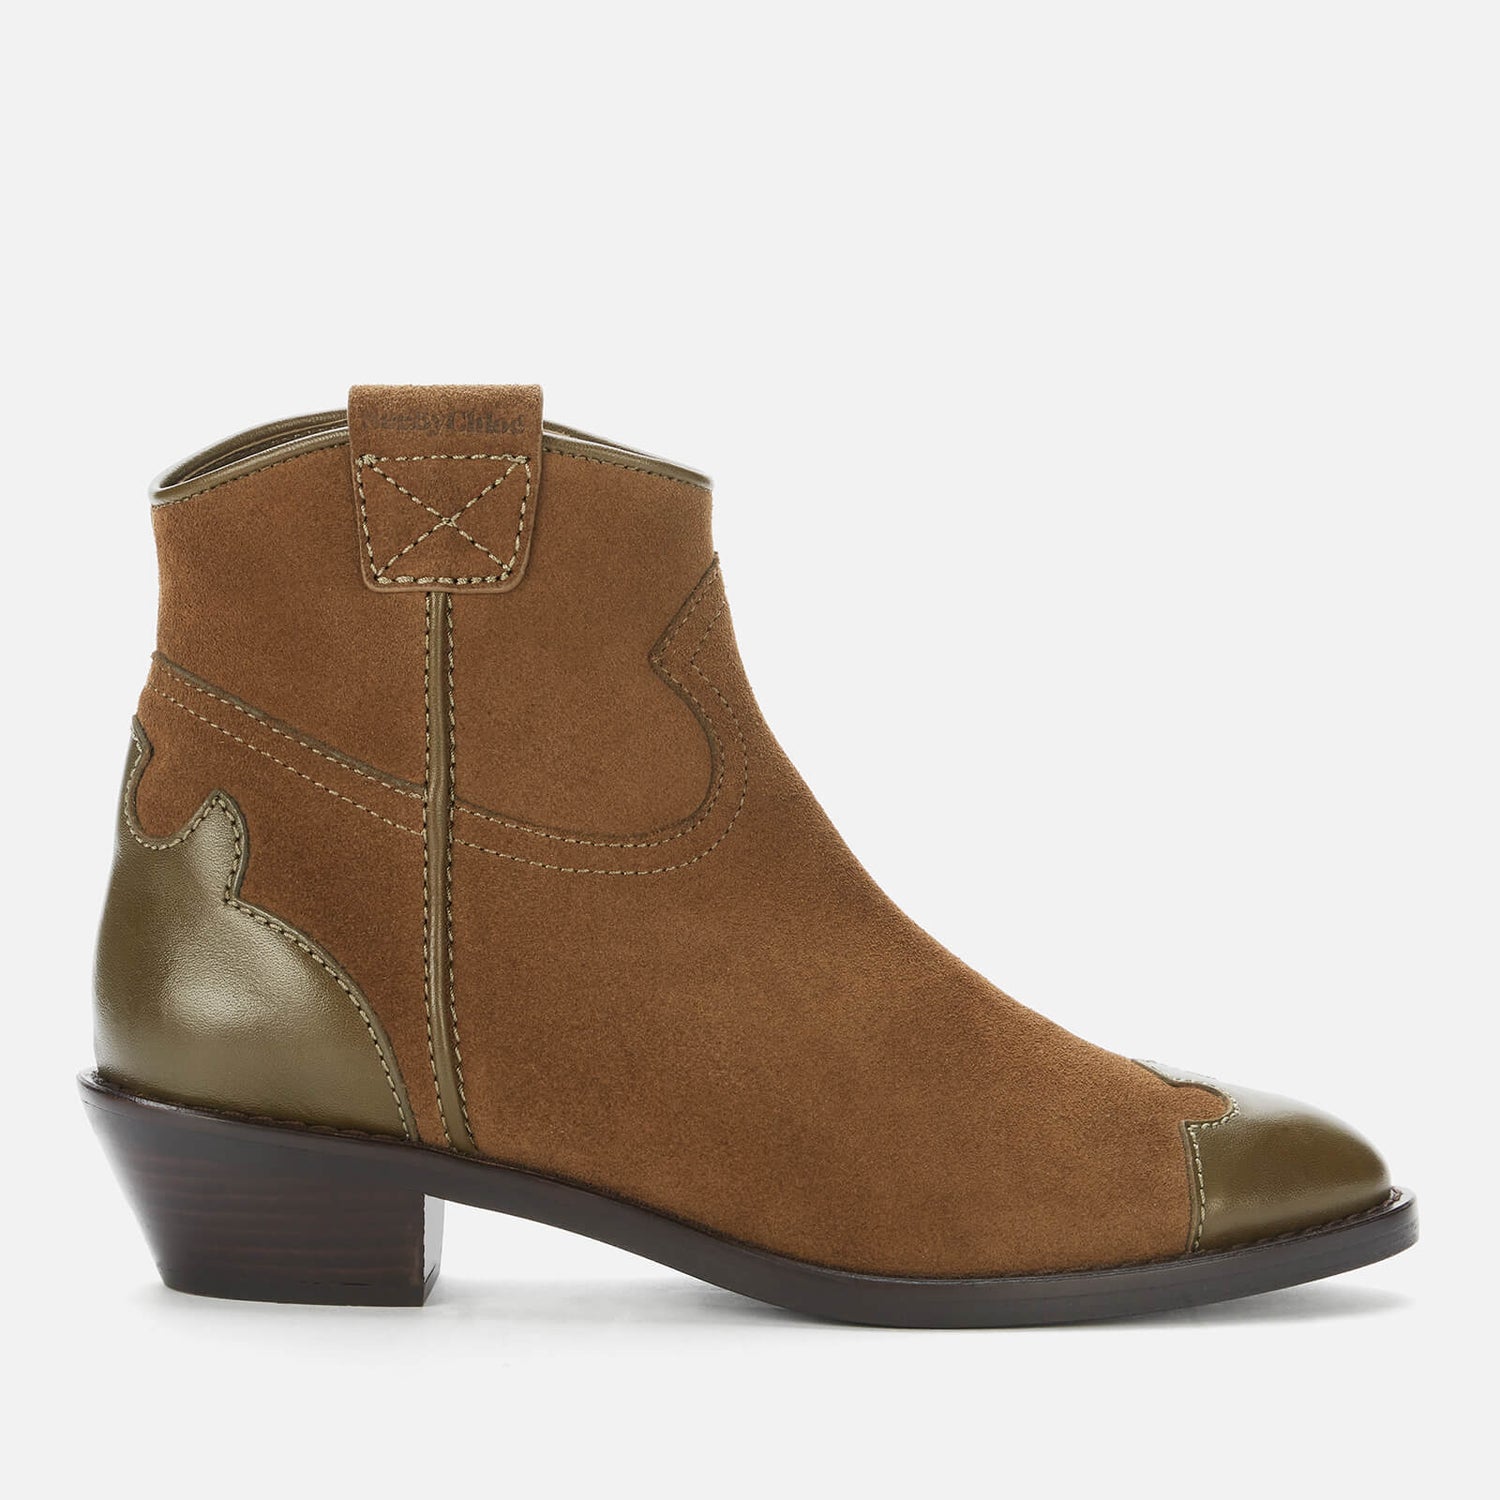 See By Chloé Women's Effie Leather/Suede Western Boots - Khaki - UK 3